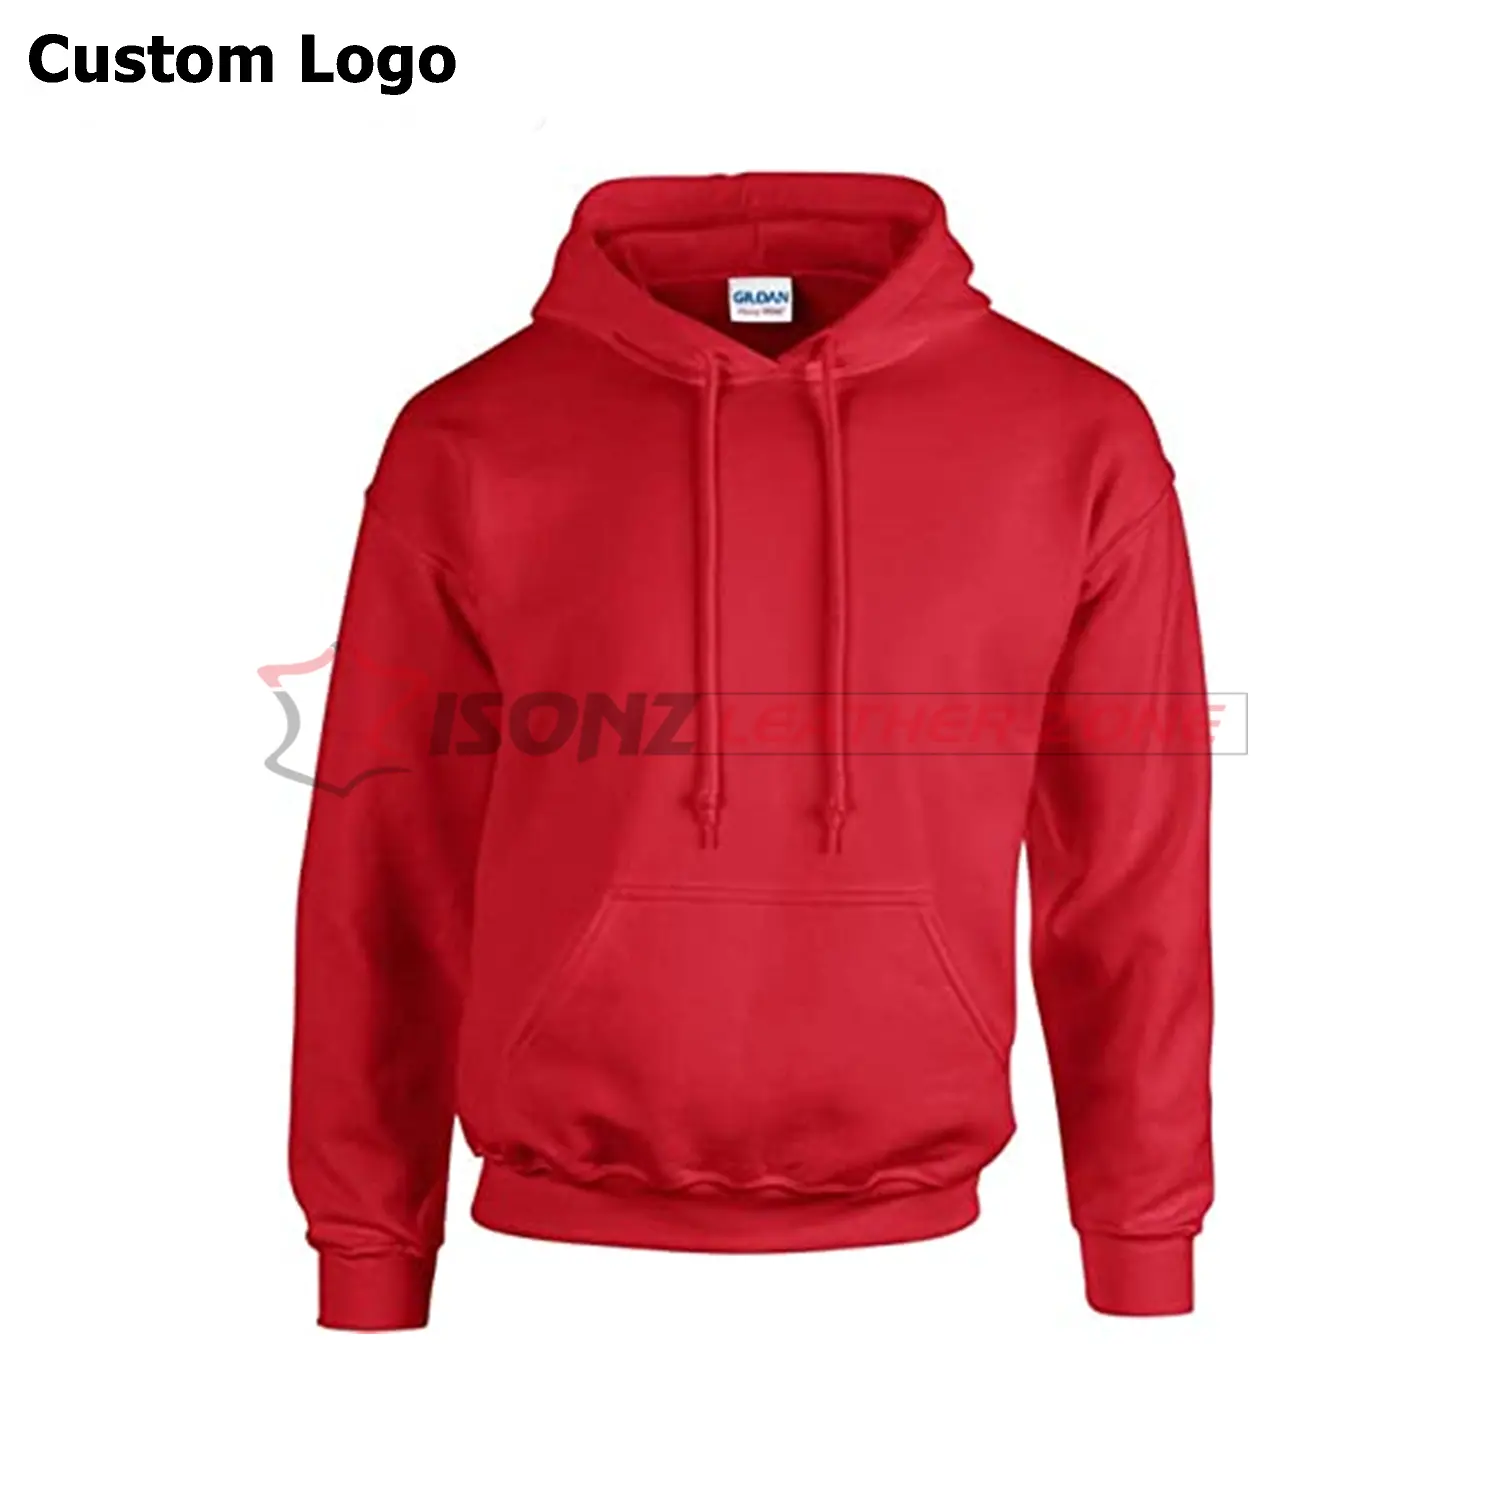 Wholesale Custom High Quality Pull Over Pigment Dyed Washed Hoodies With Fleece